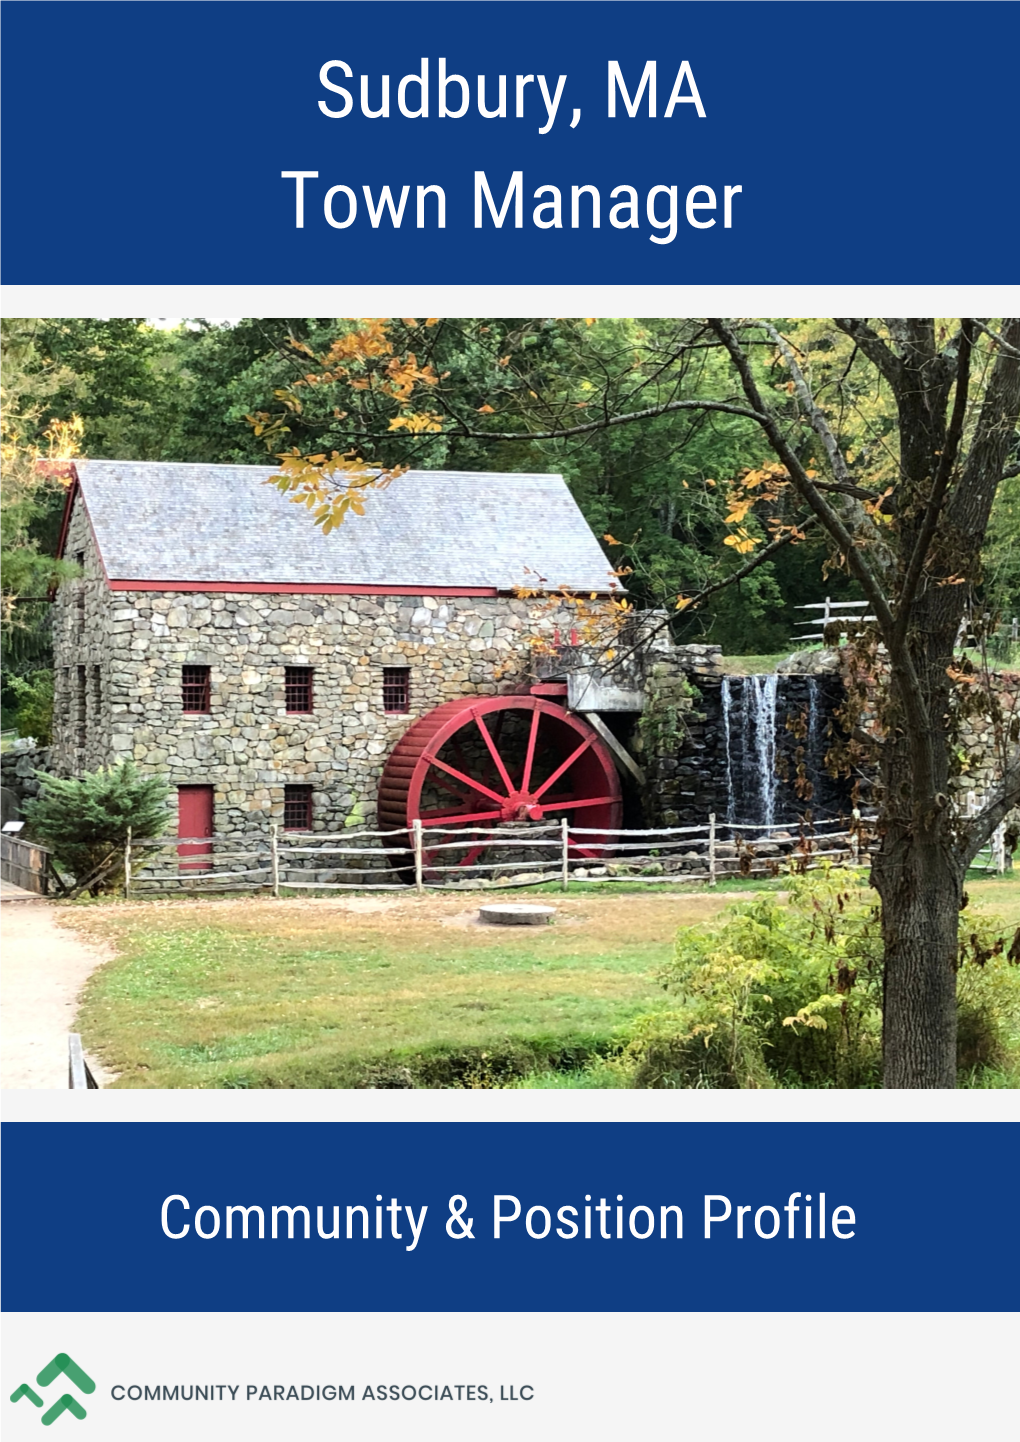 Sudbury, MA Town Manager